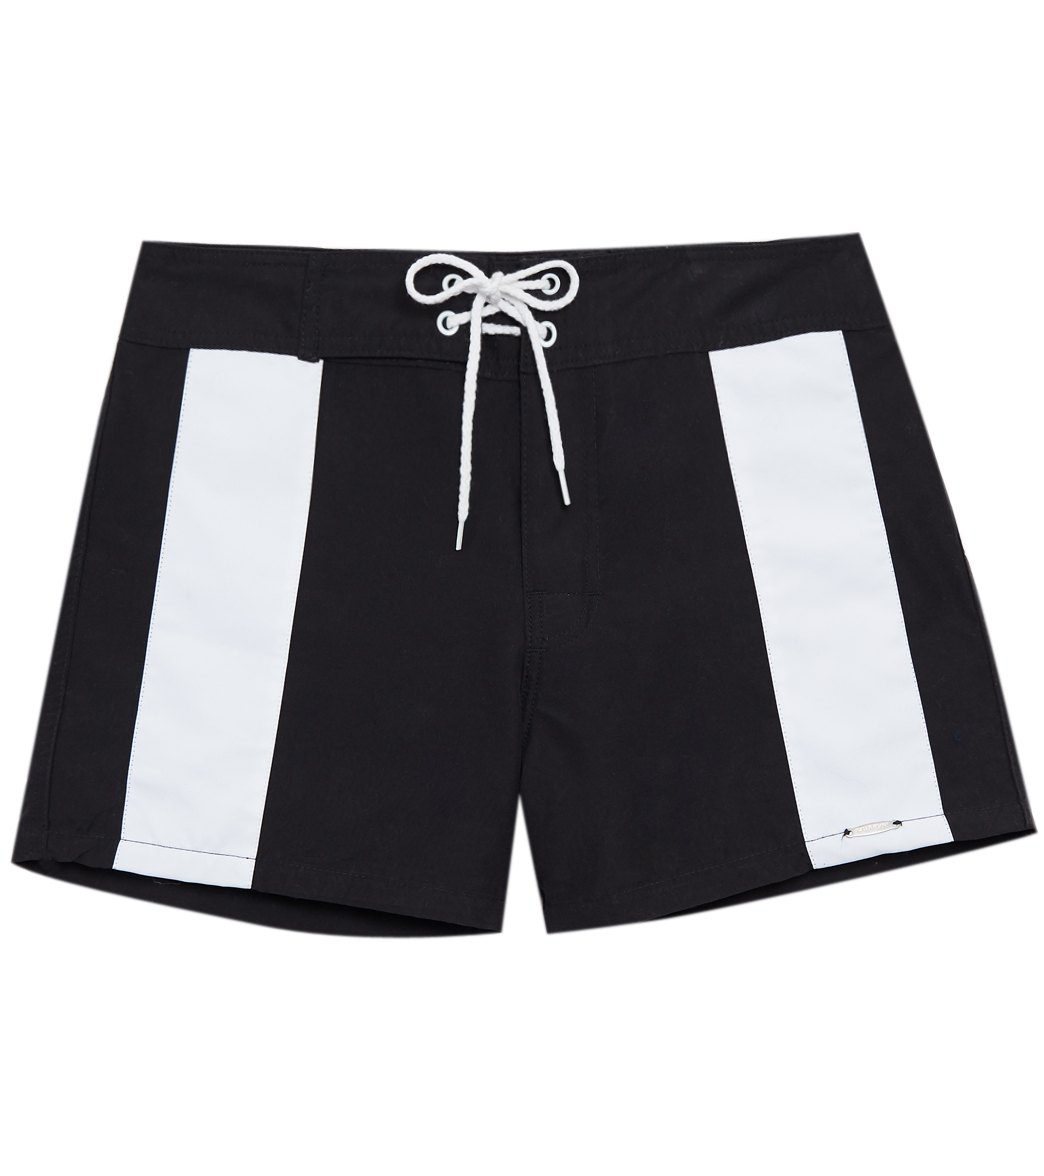 Sauvage Boardwalk Classic Board Short at SwimOutlet.com - Free Shipping